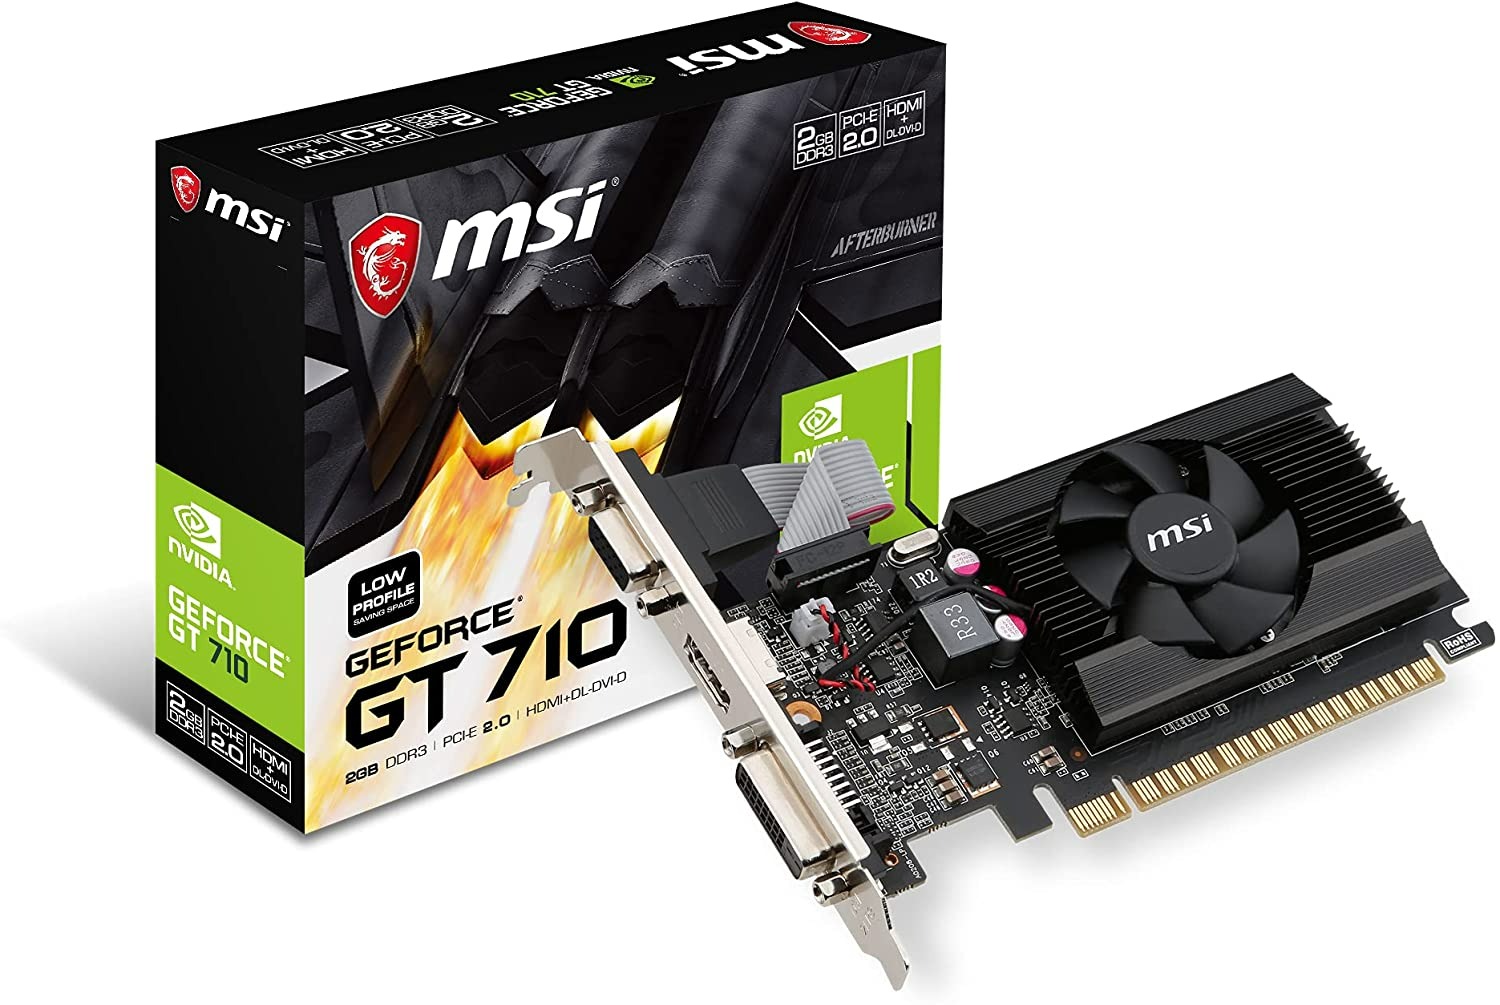 graphics cards that support opengl 3.3